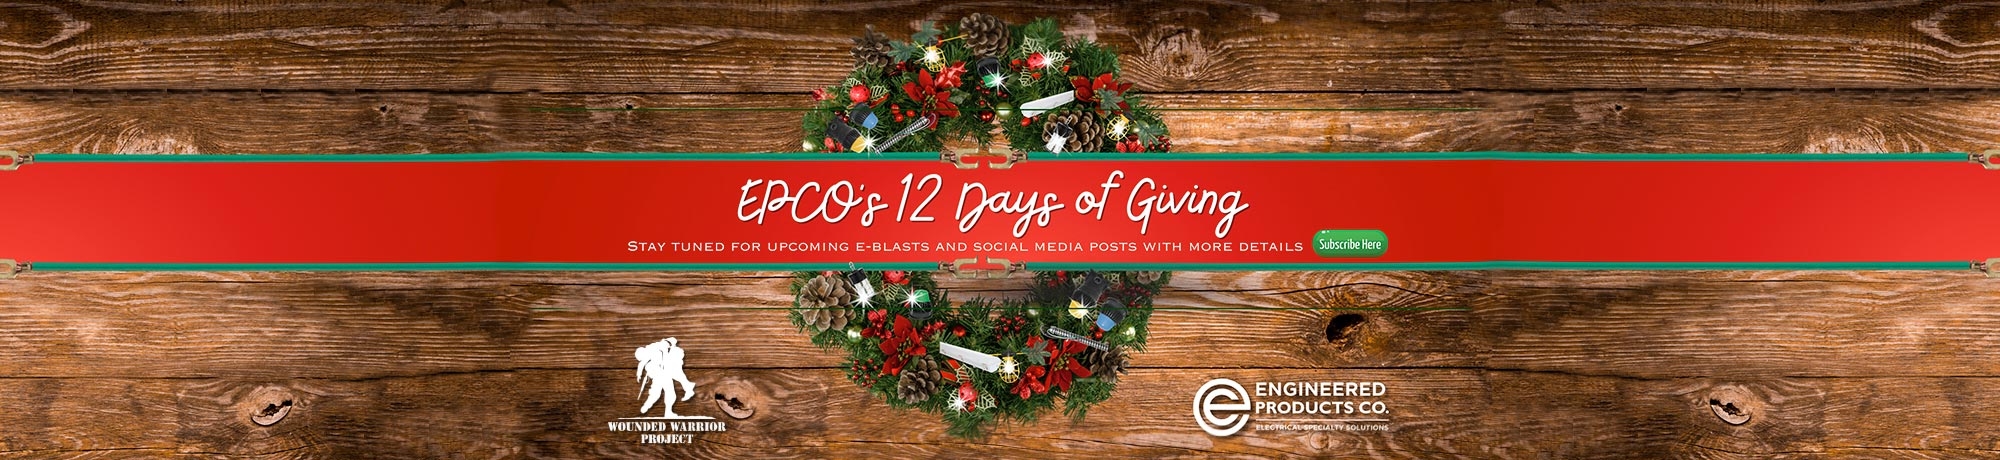 EPCO 12 DAYS OF GIVING